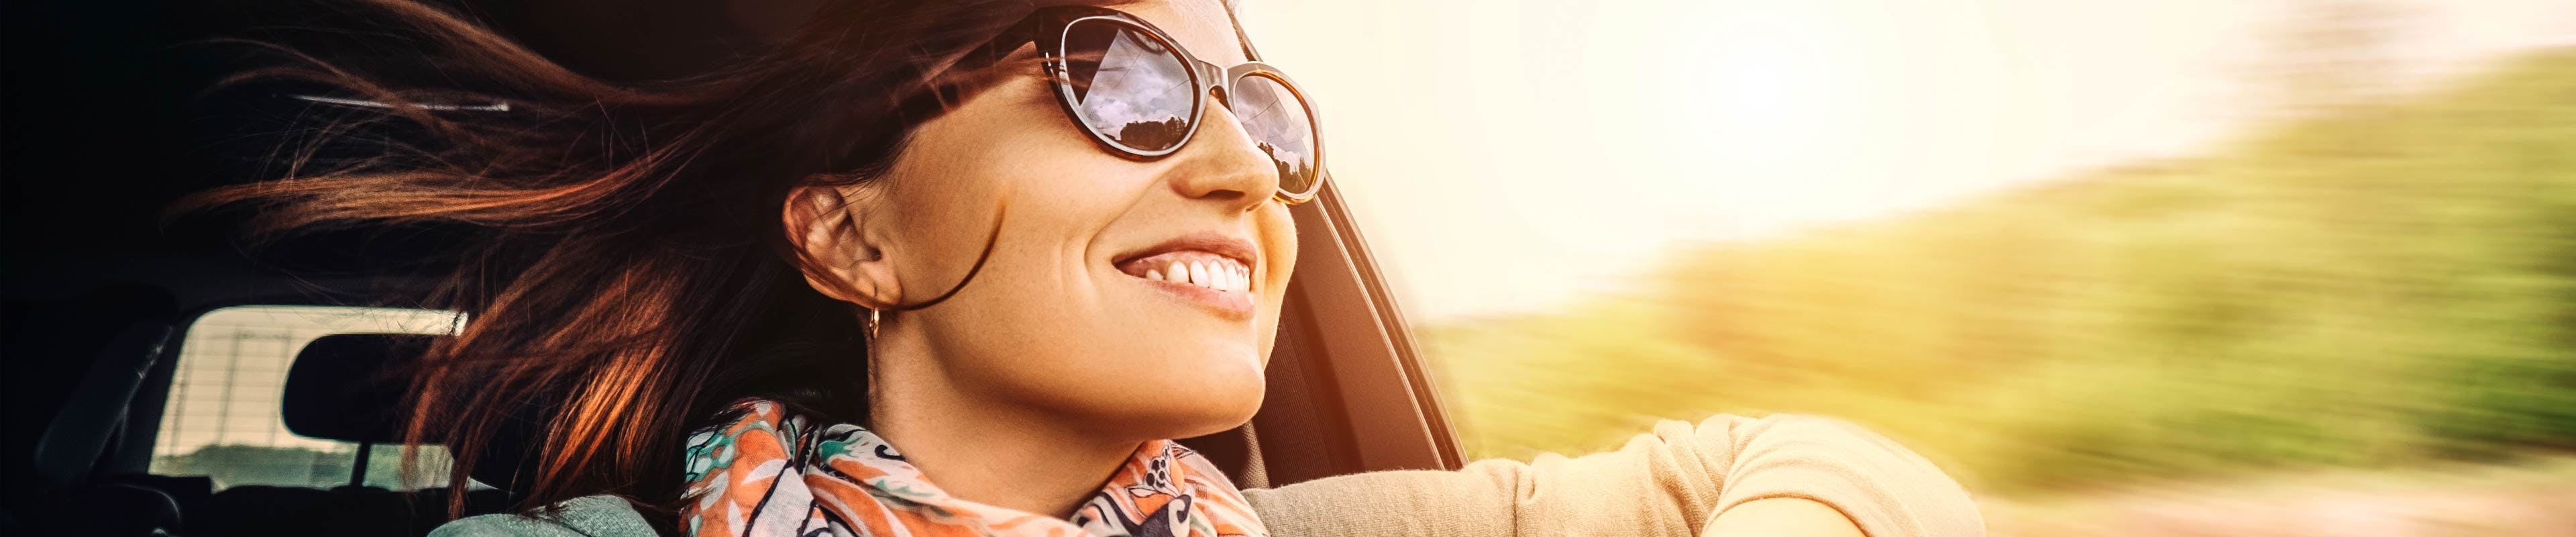 Woman happily driving after getting first car insurance policy 